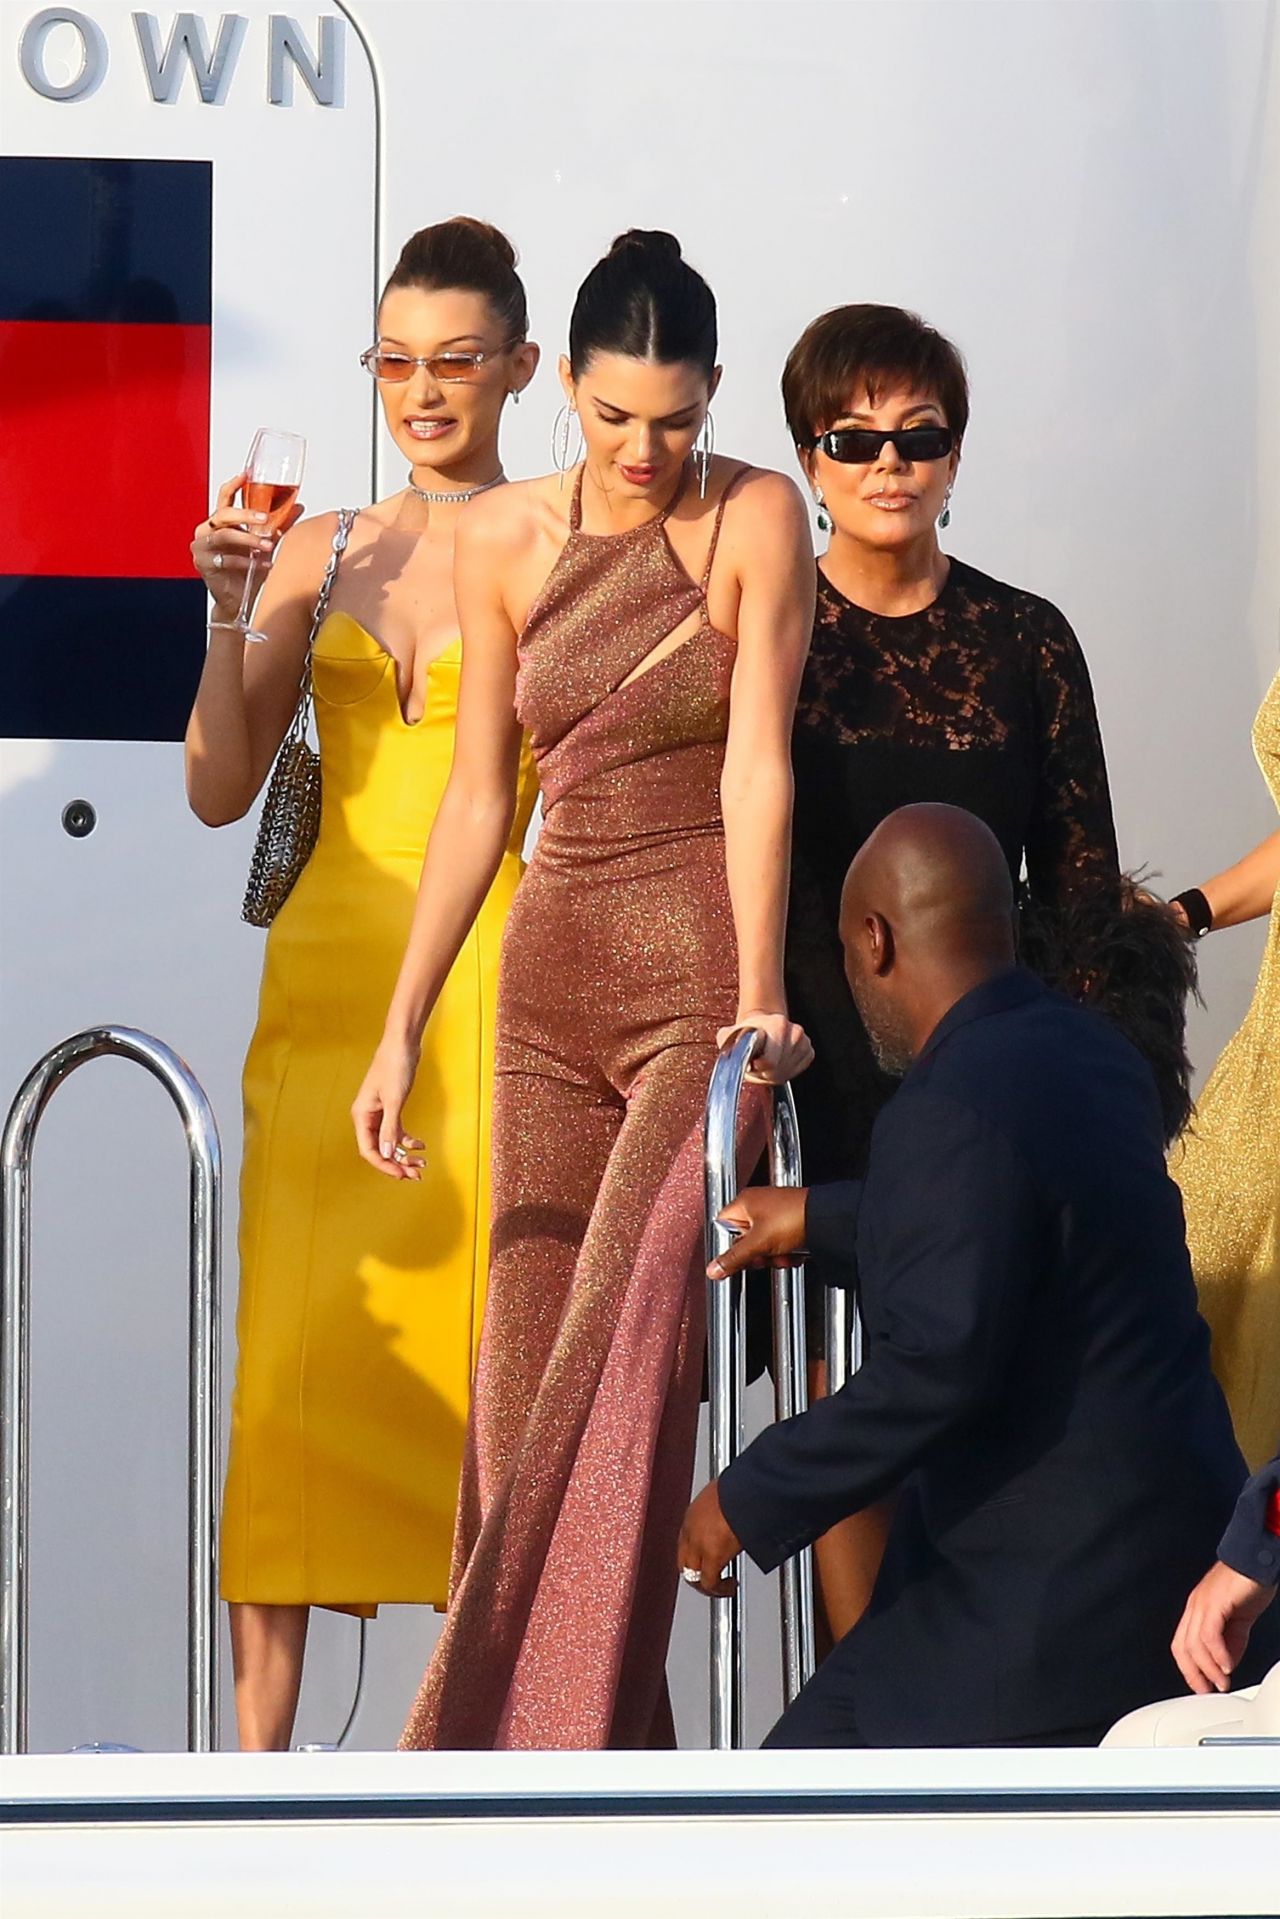 bella-hadid-and-kendall-jenner-tommy-hilfigers-yacht-in-monaco-05-25-2019-4.jpg